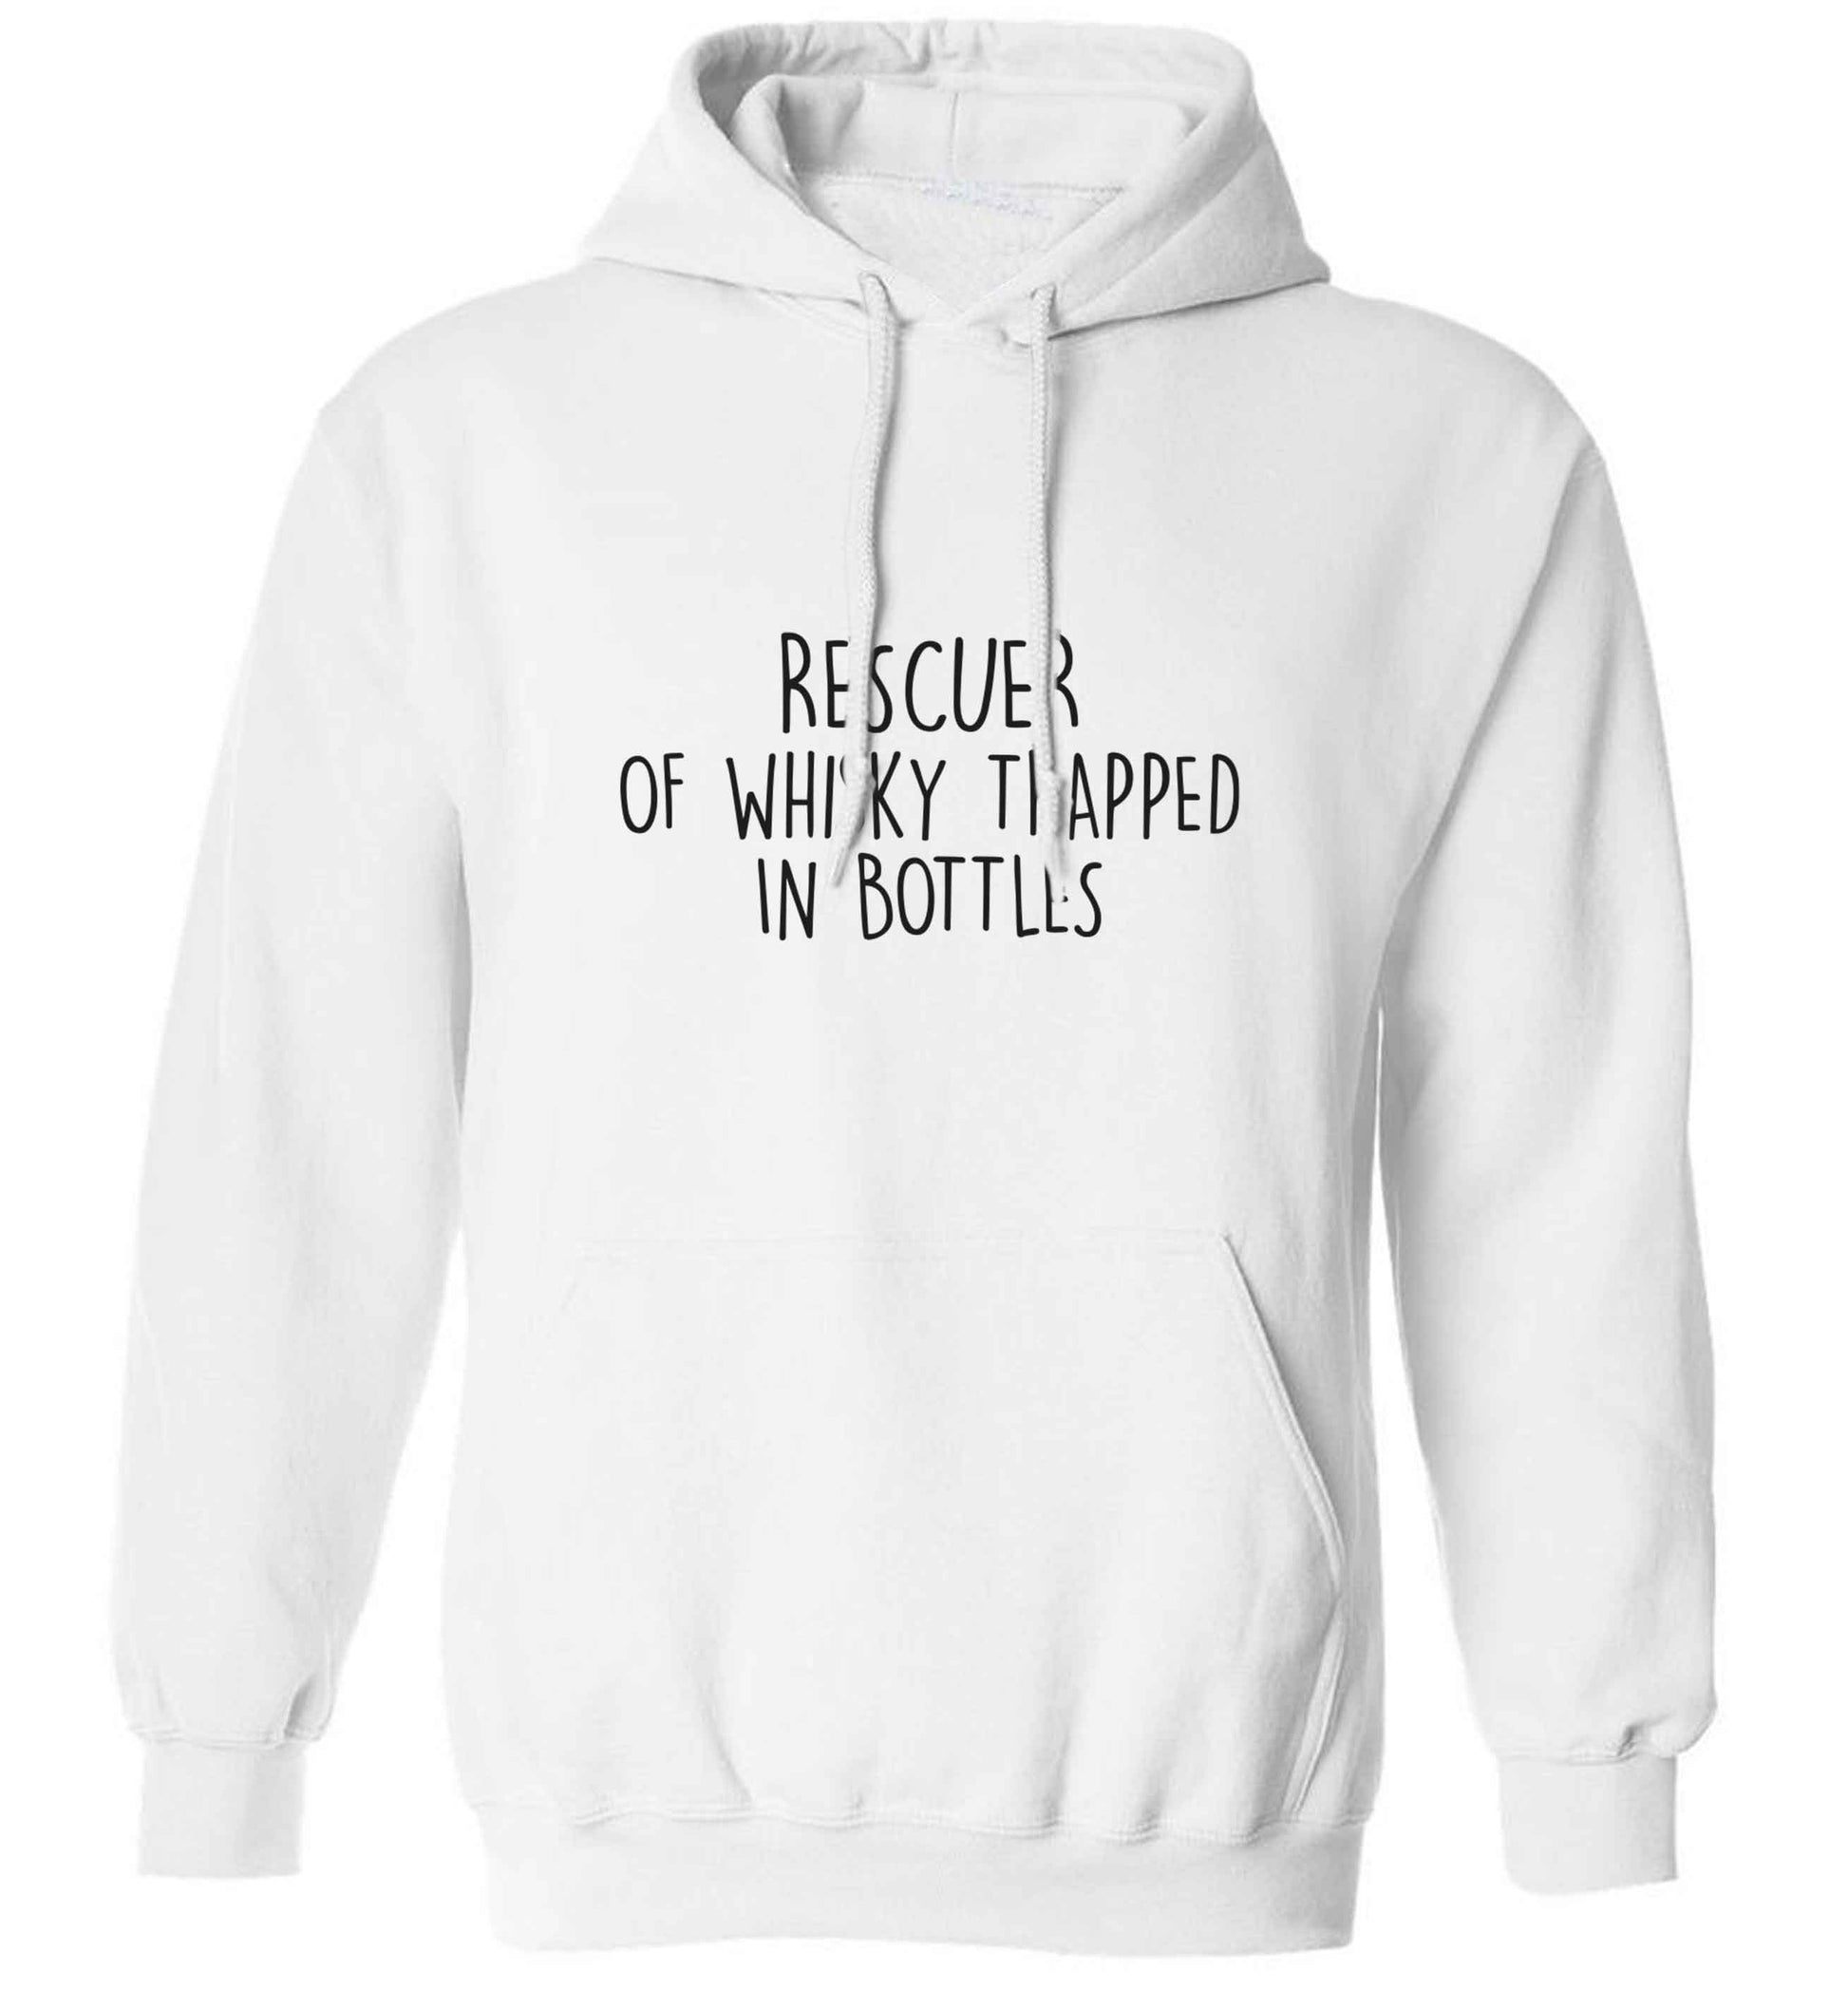 Rescuer of whisky trapped in bottles adults unisex white hoodie 2XL